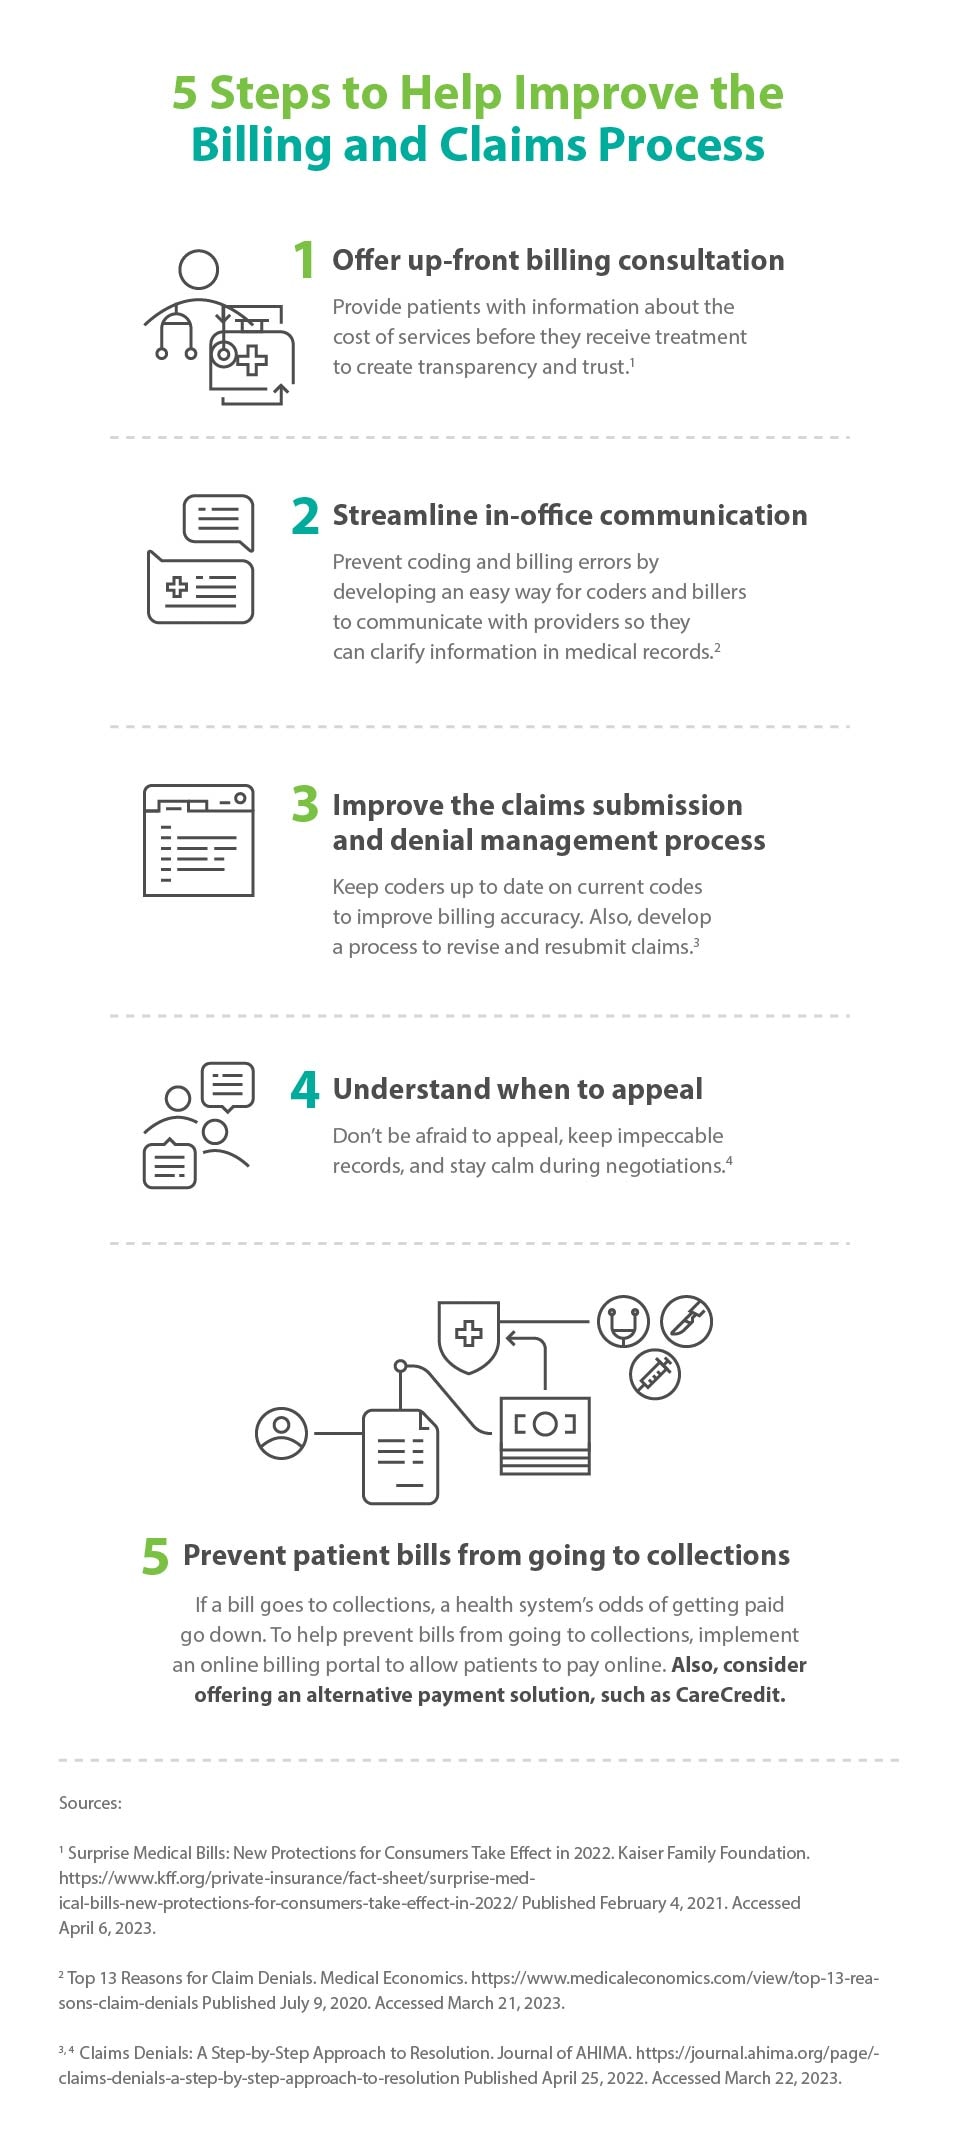 5 Steps to Improve the Billing and Claims Process